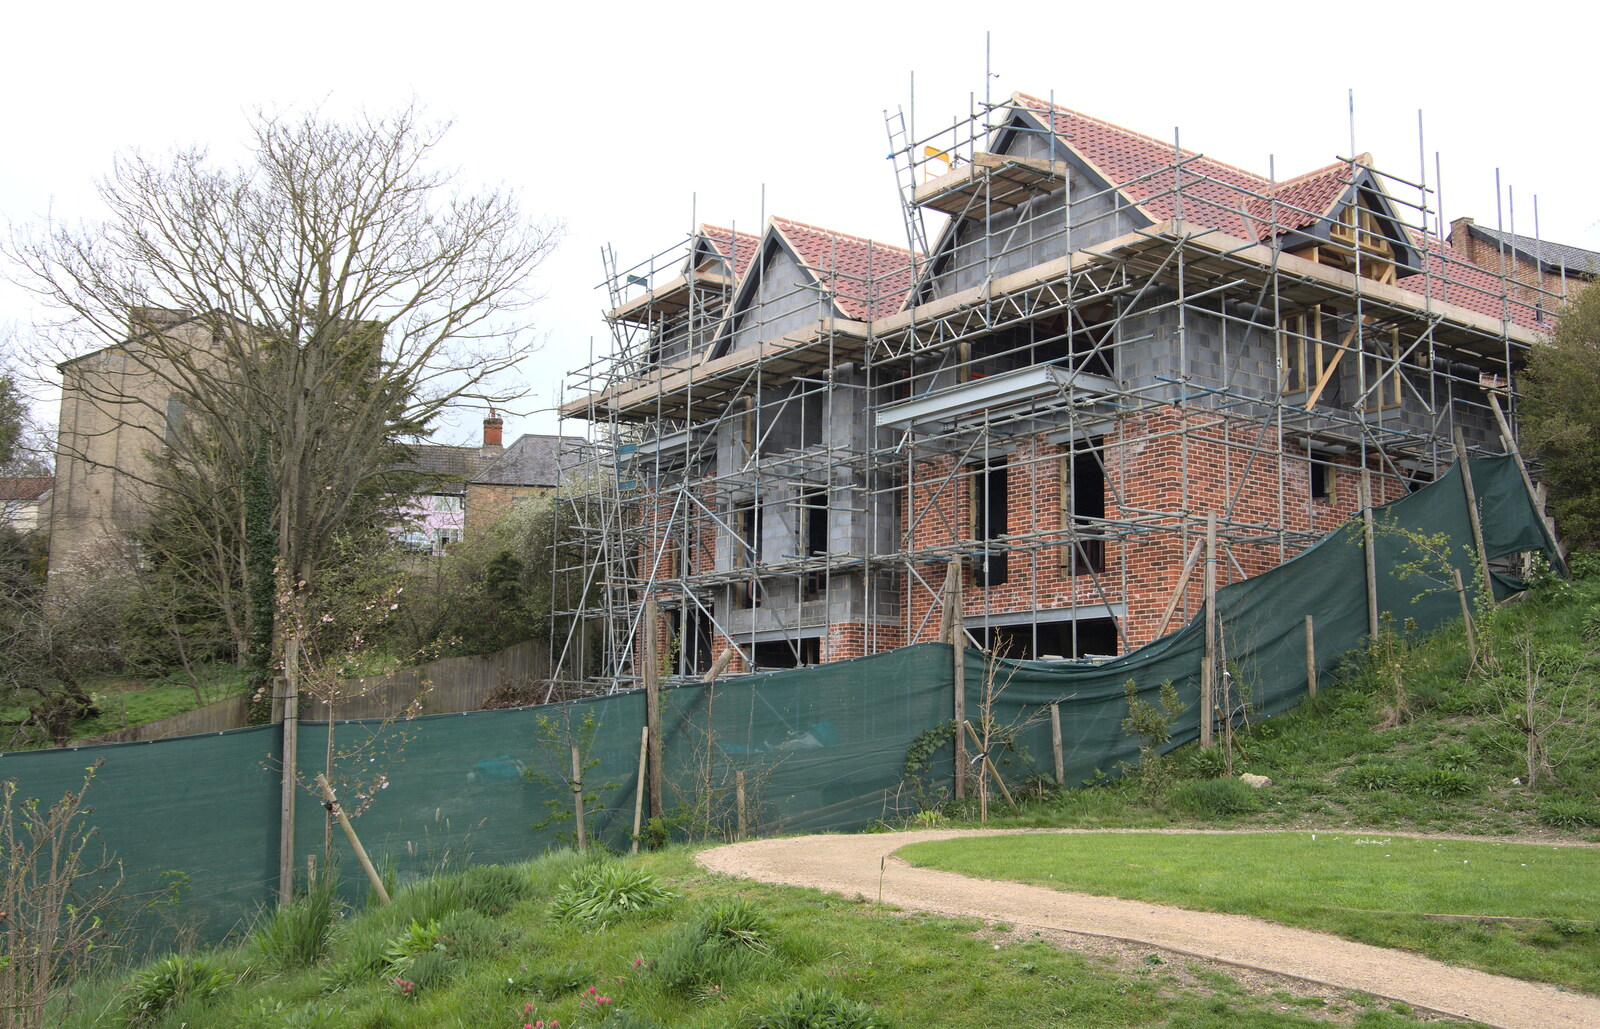 A Trip Down South, New Milton, Hampshire - 9th April 2022: There's a new build going on by the Mere